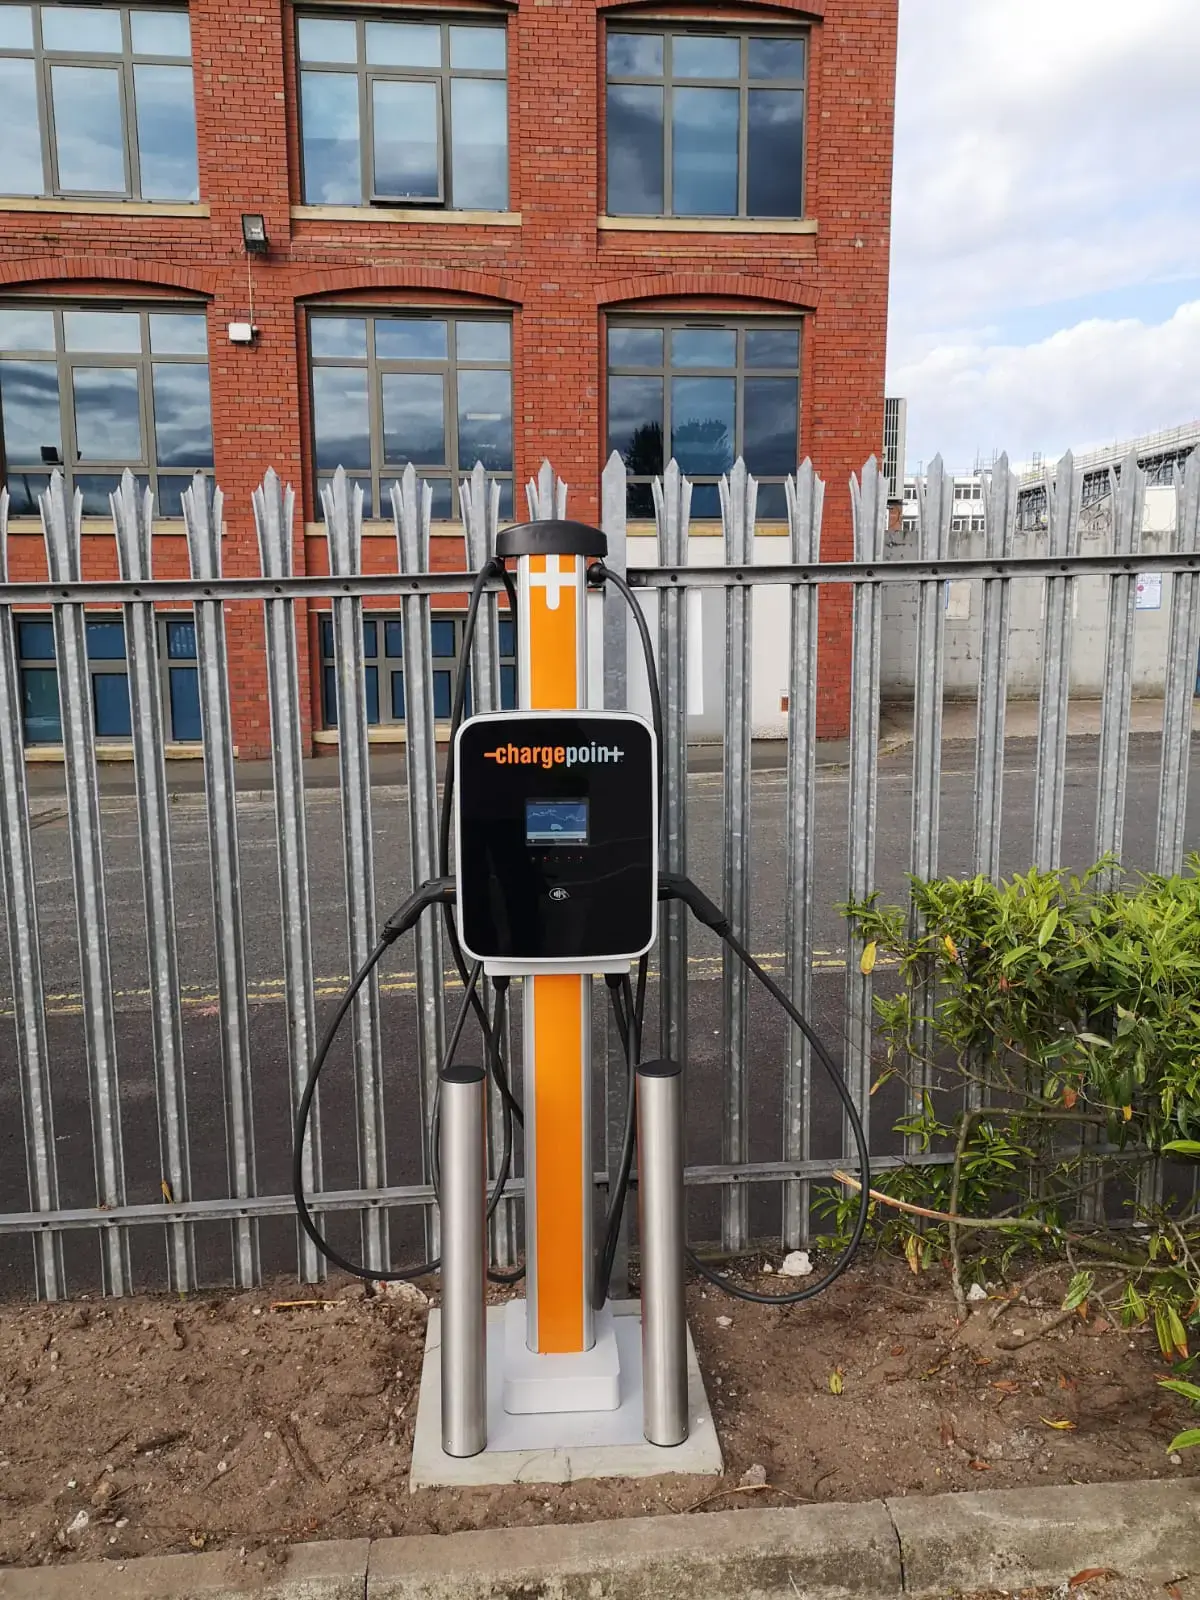 EV blocks chargepoint